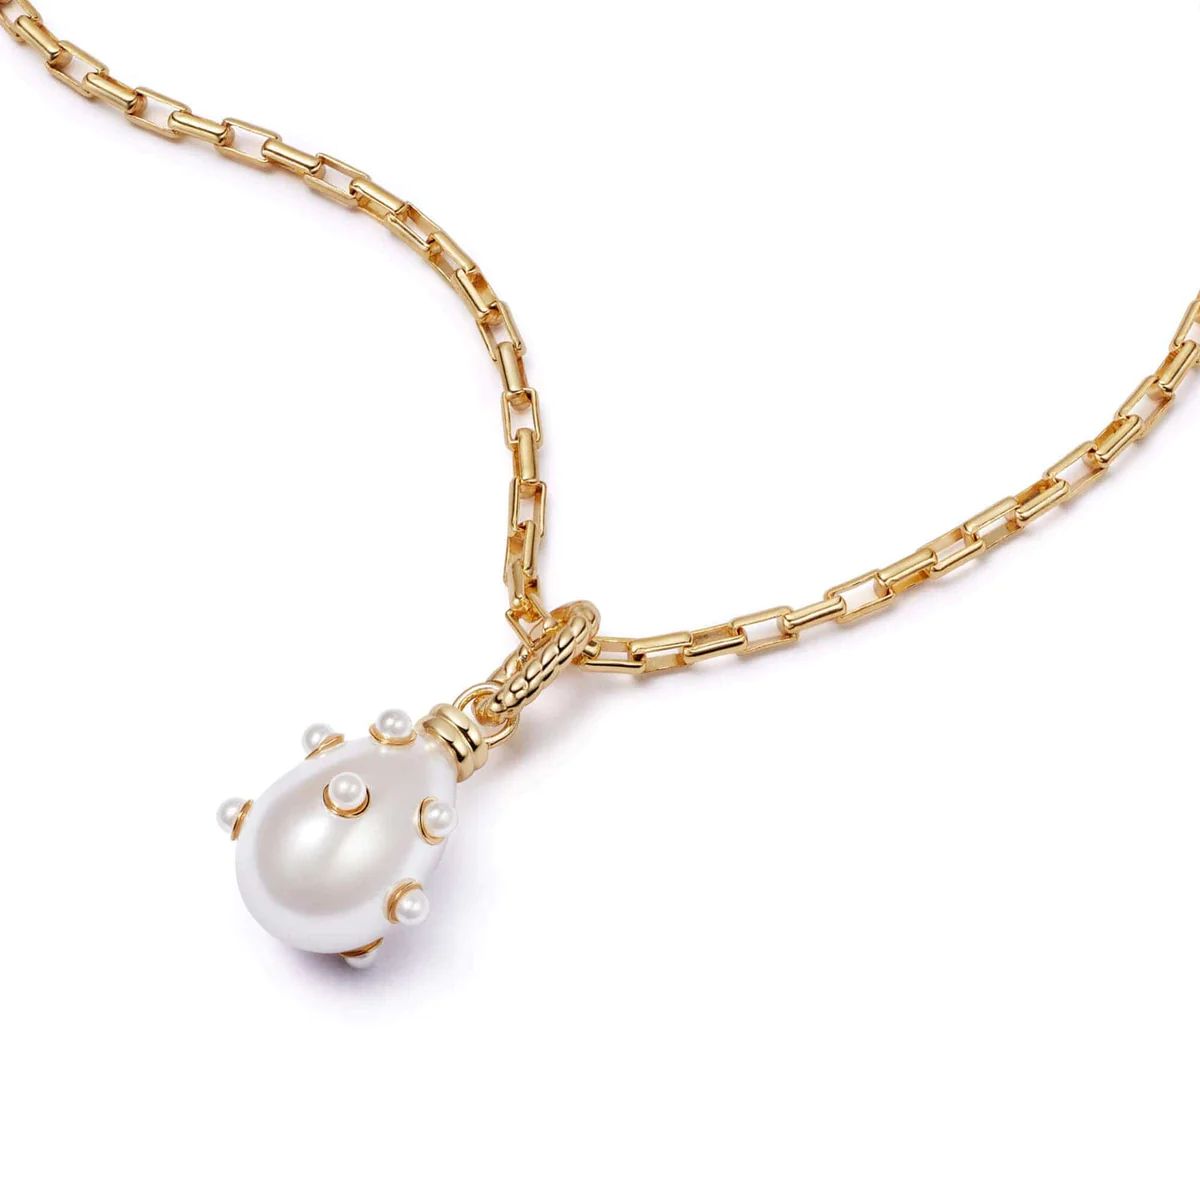 Shrimps Pearl Charm Necklace 18ct Gold Plate | Daisy London Jewellery